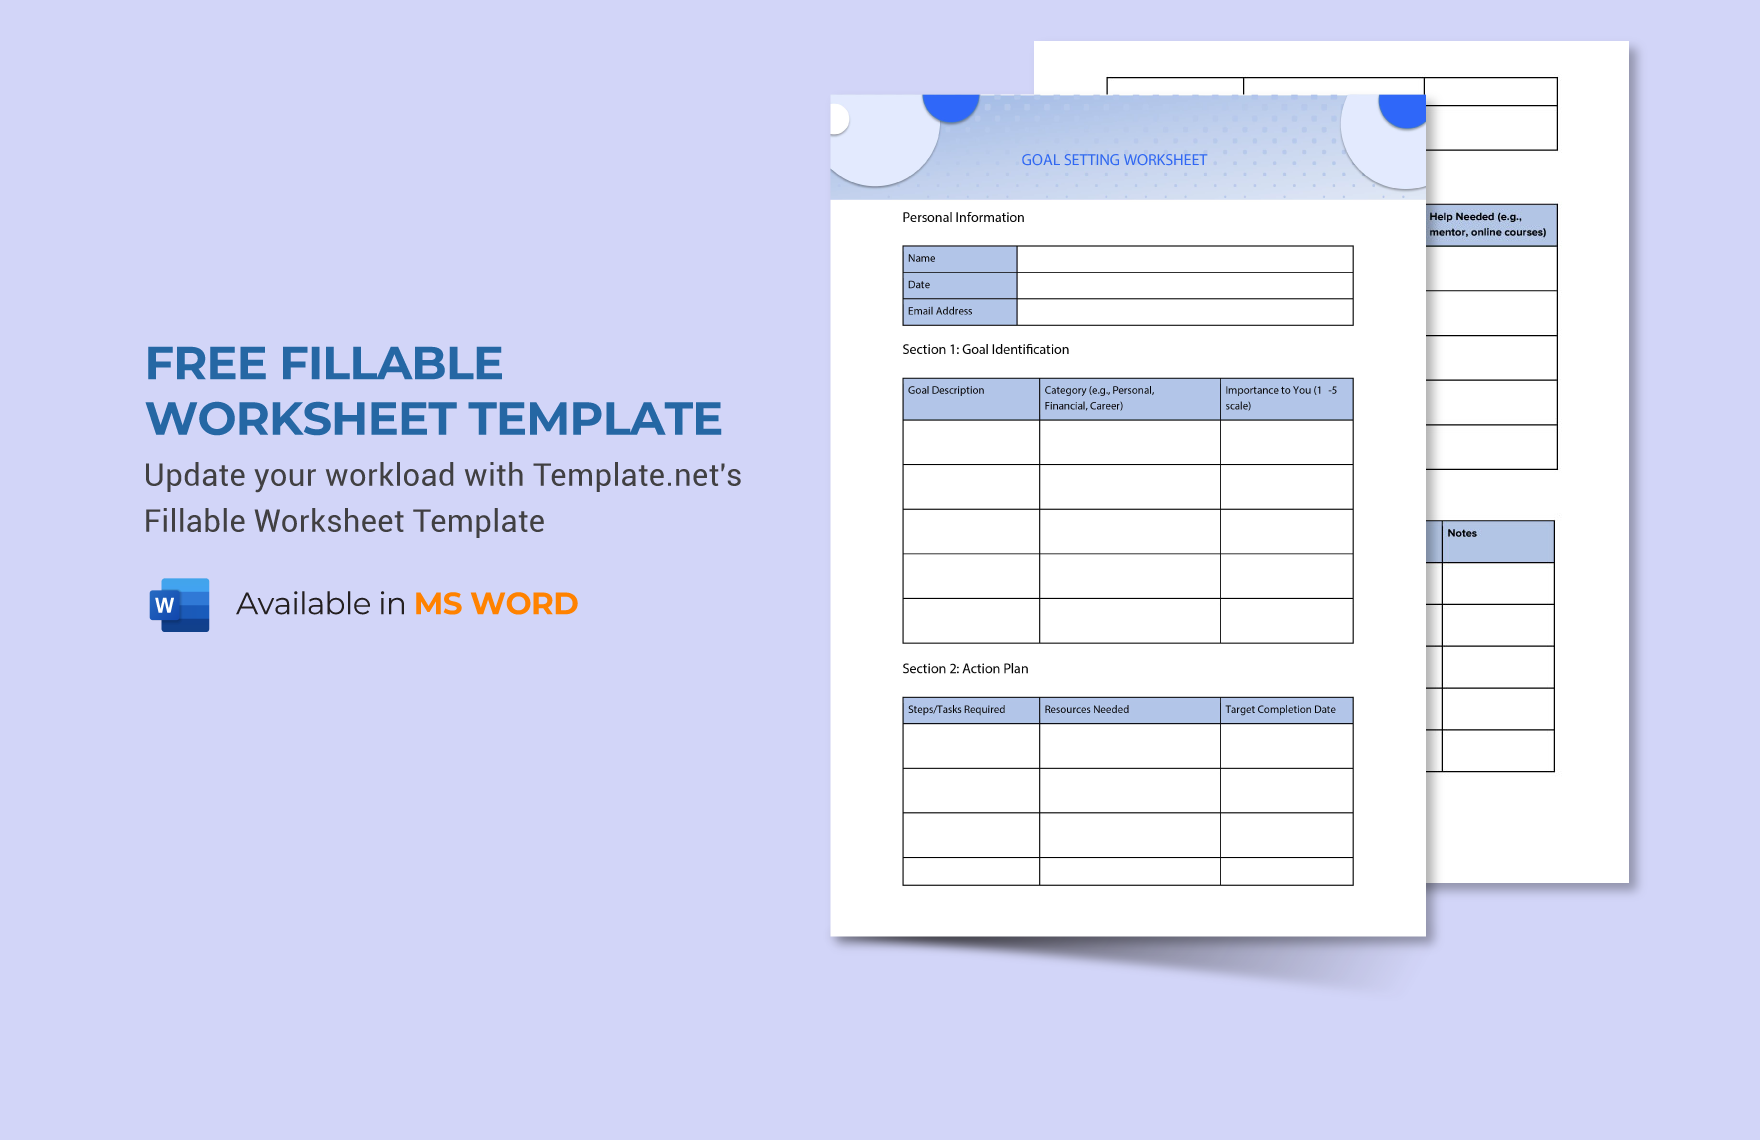 Free Fillable Worksheet Template in Word